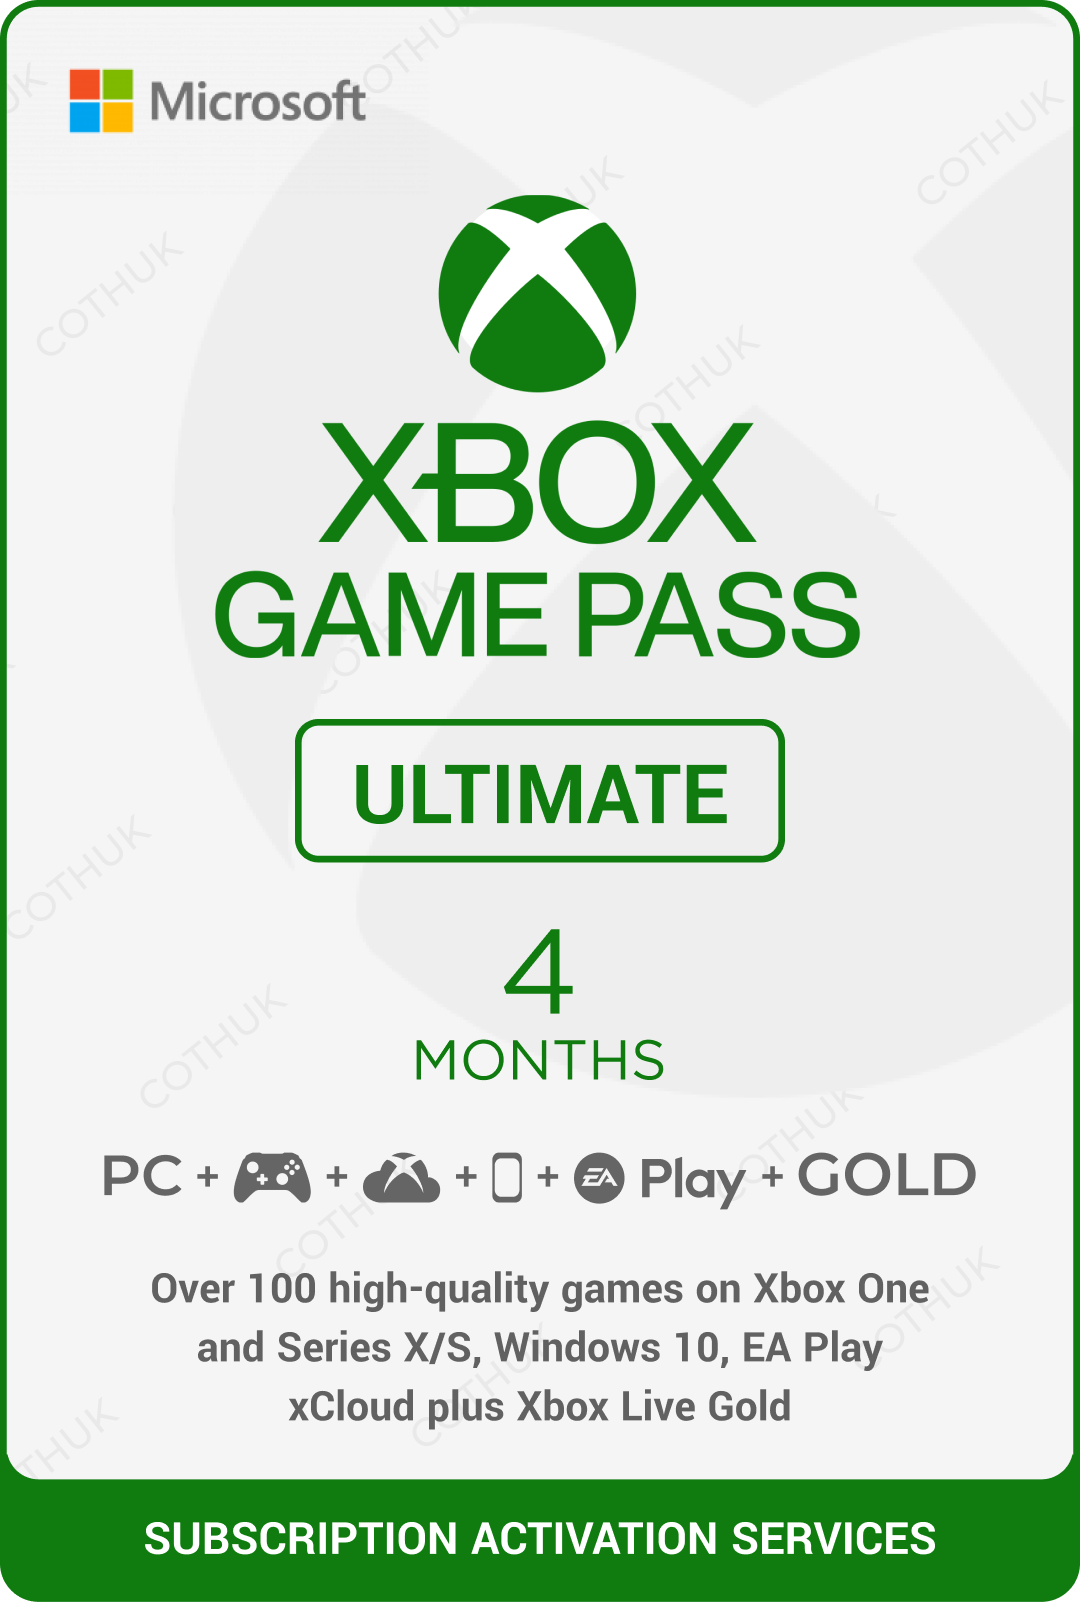 🔥 XBOX GAME PASS ULTIMATE 4 MONTHS+EA PLAY+Cashback